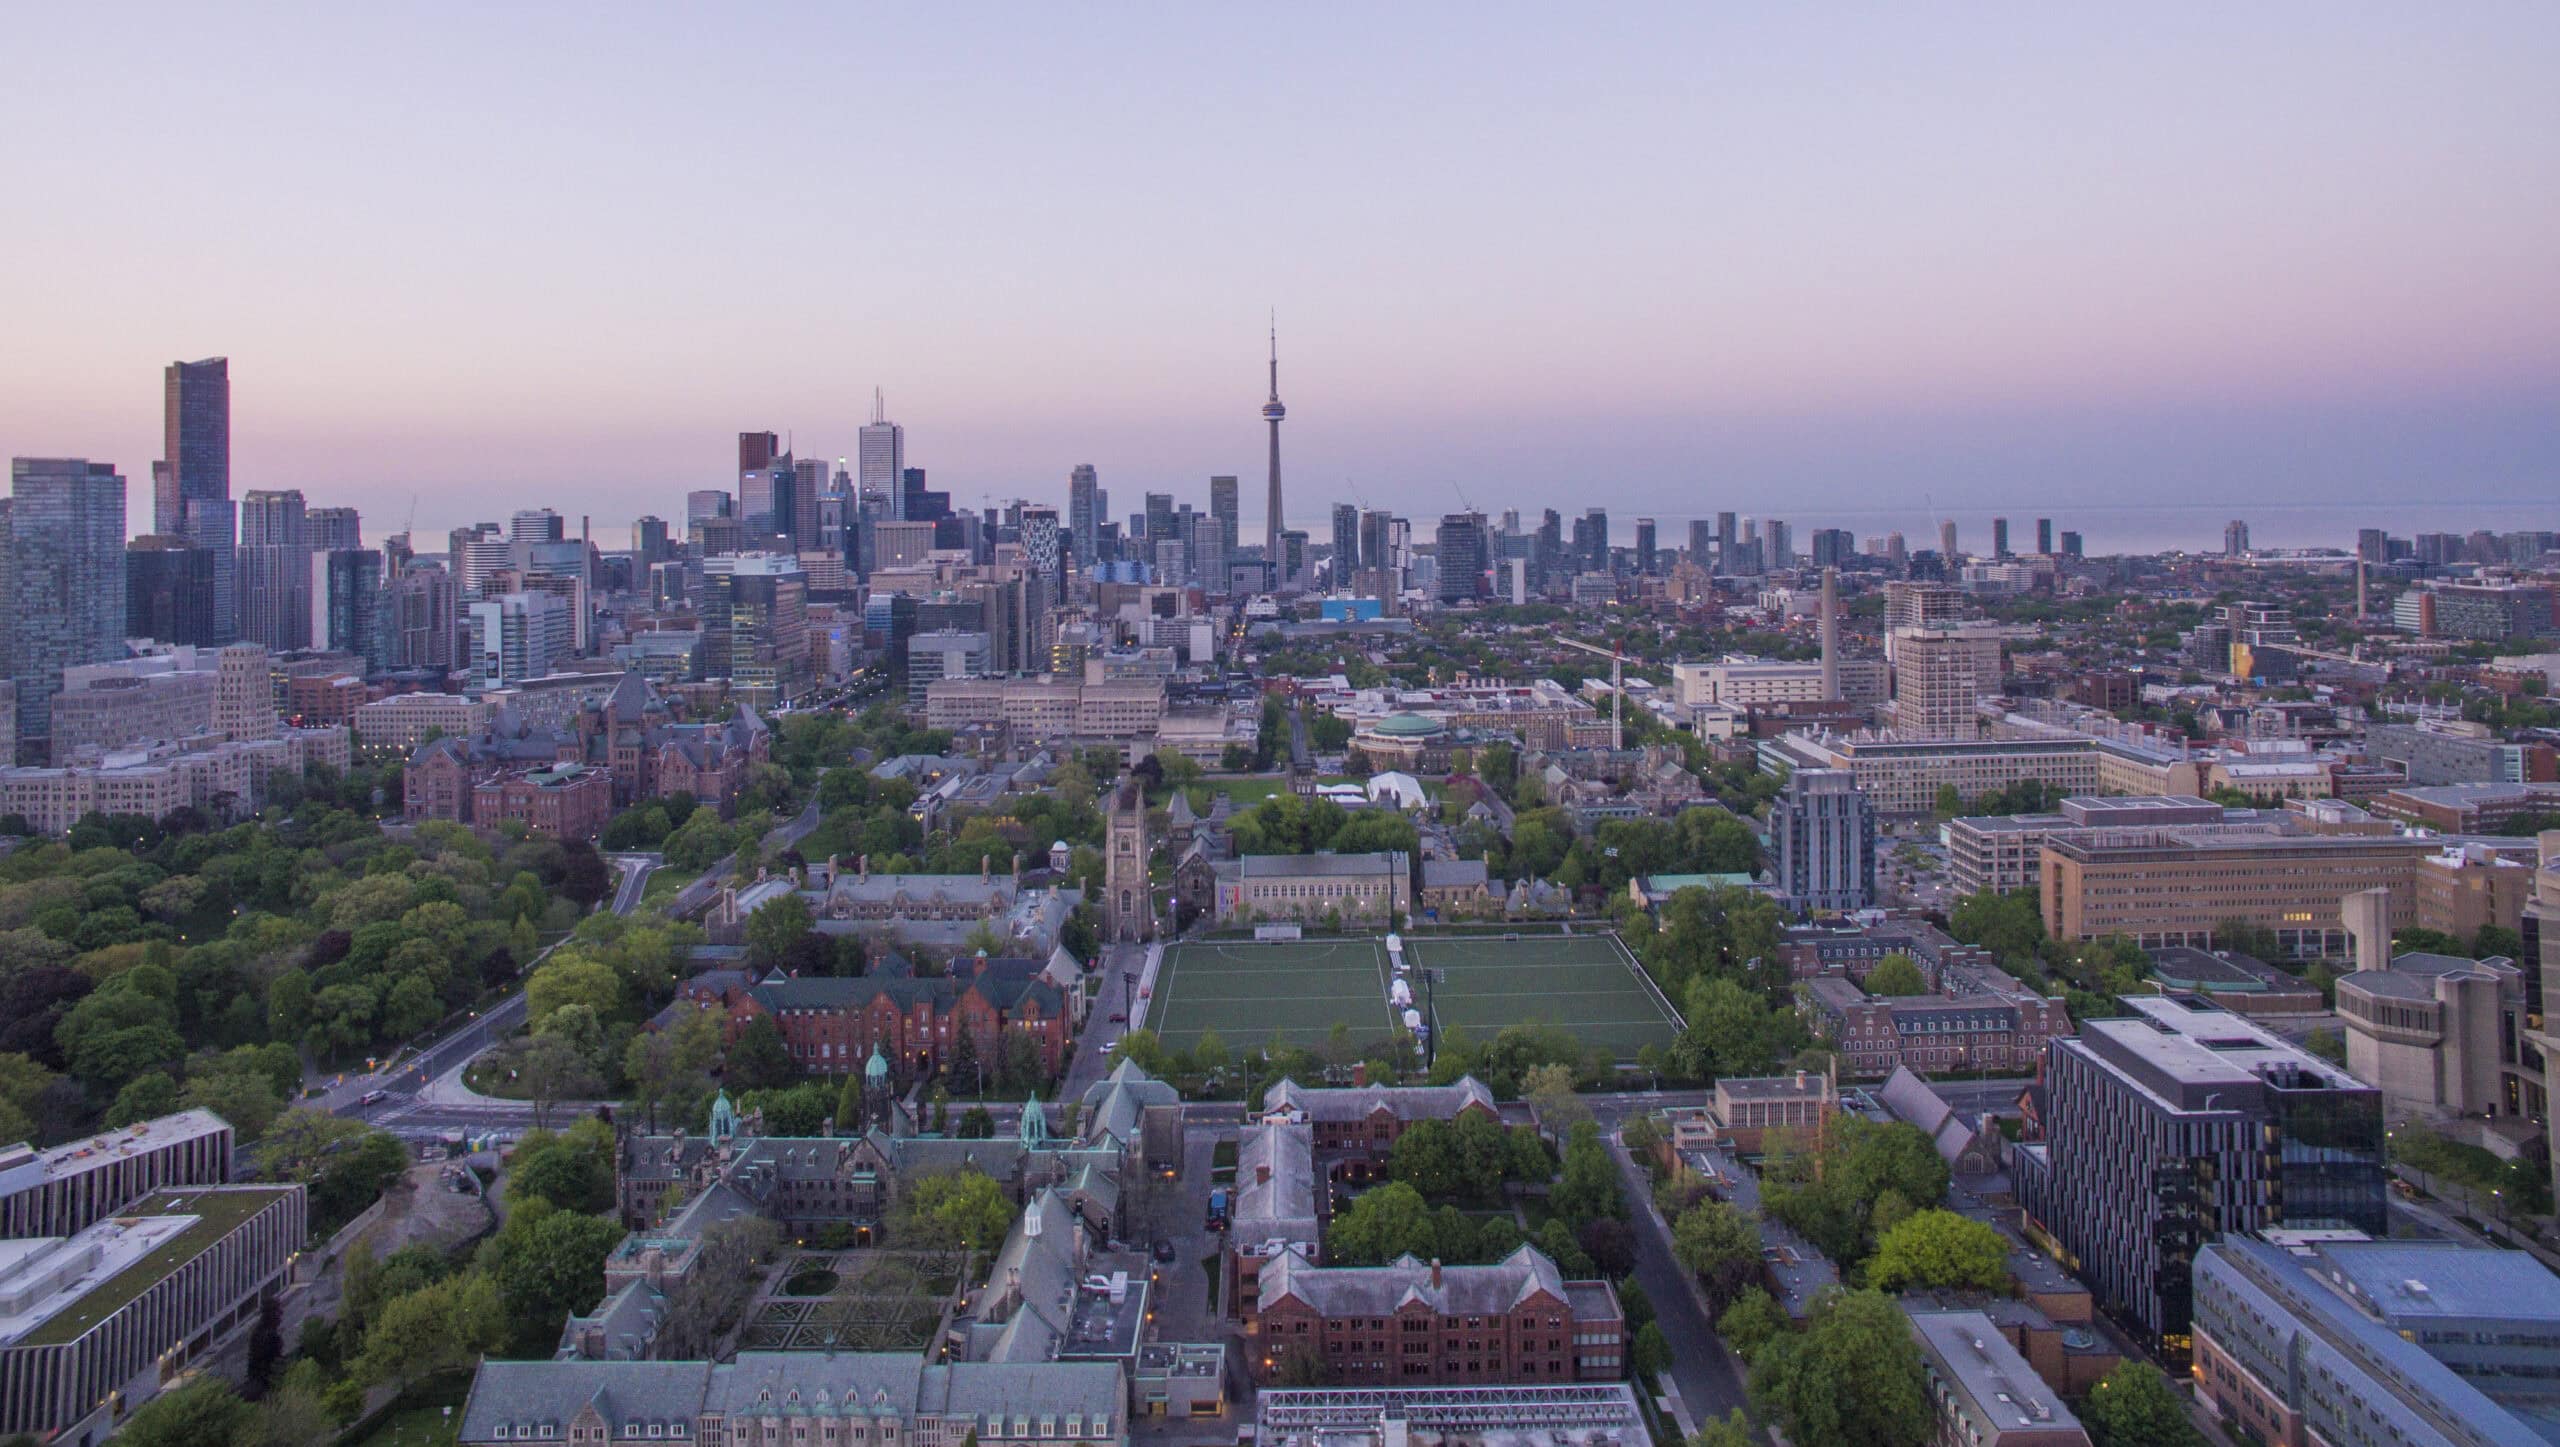 The Toronto skyline seen from the St. George Campus